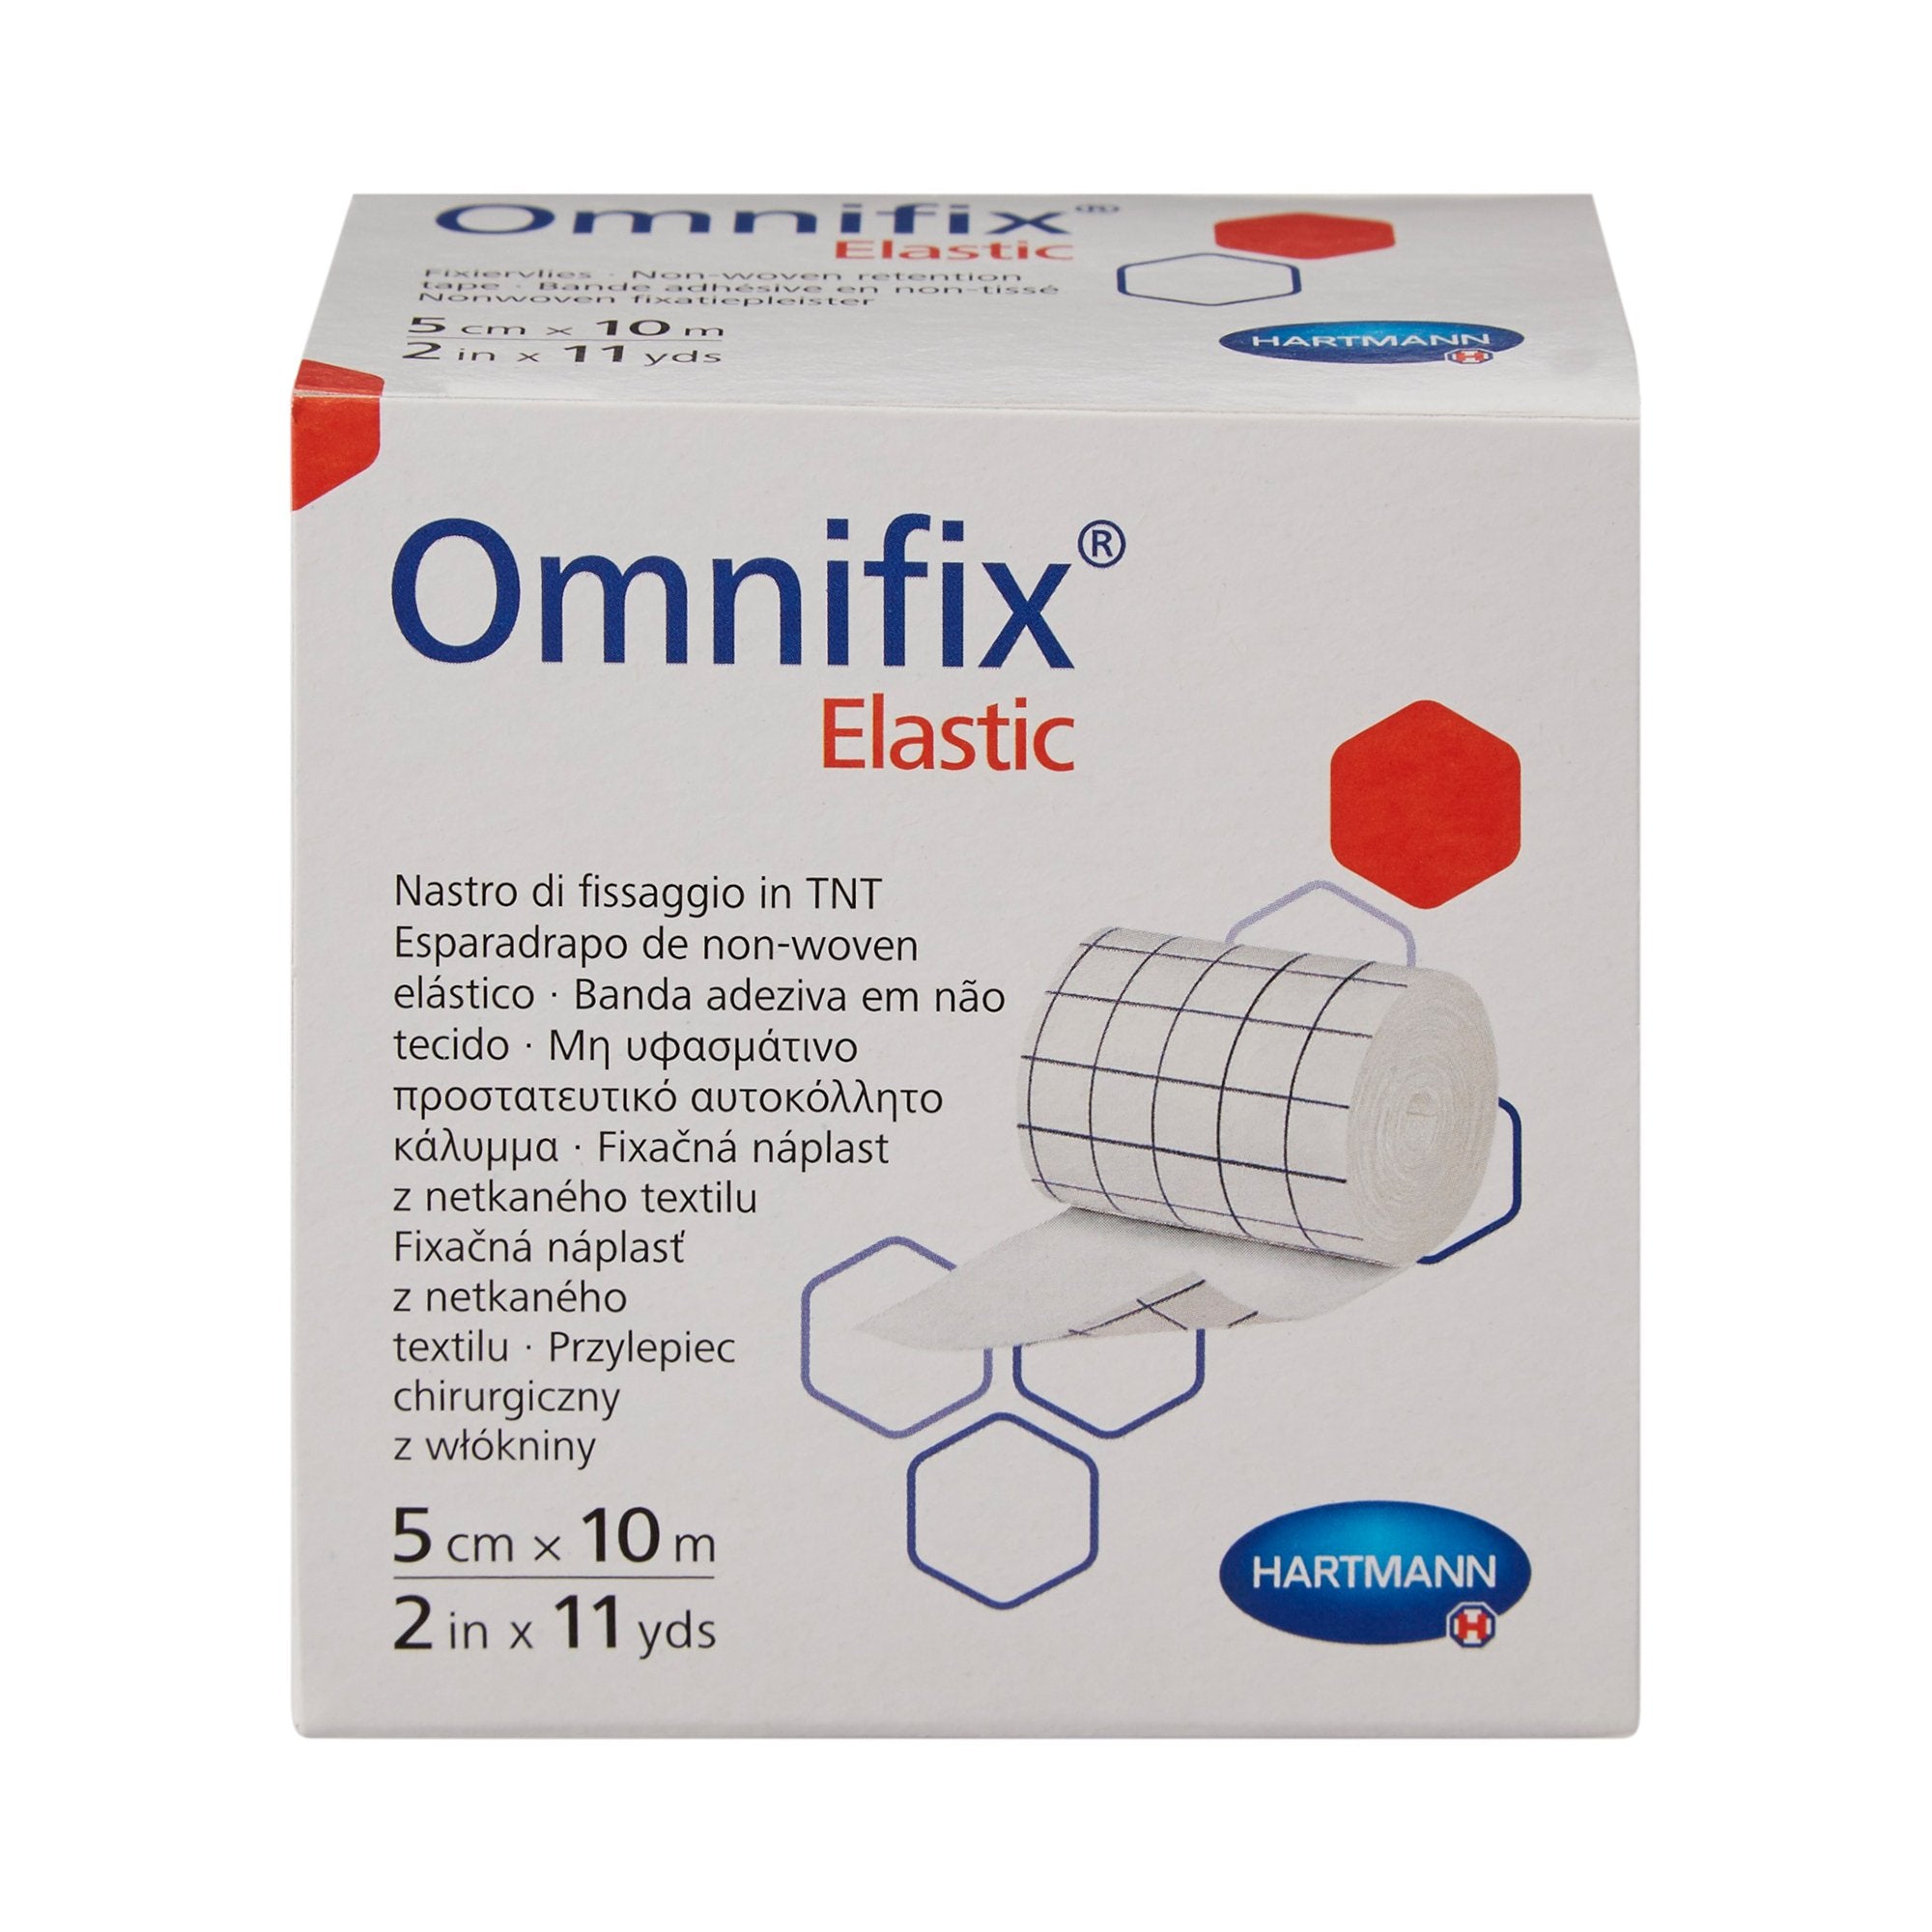 Dressing Retention Tape with Liner Omnifix® Elastic White 2 Inch X 11 Yard Nonwoven NonSterile